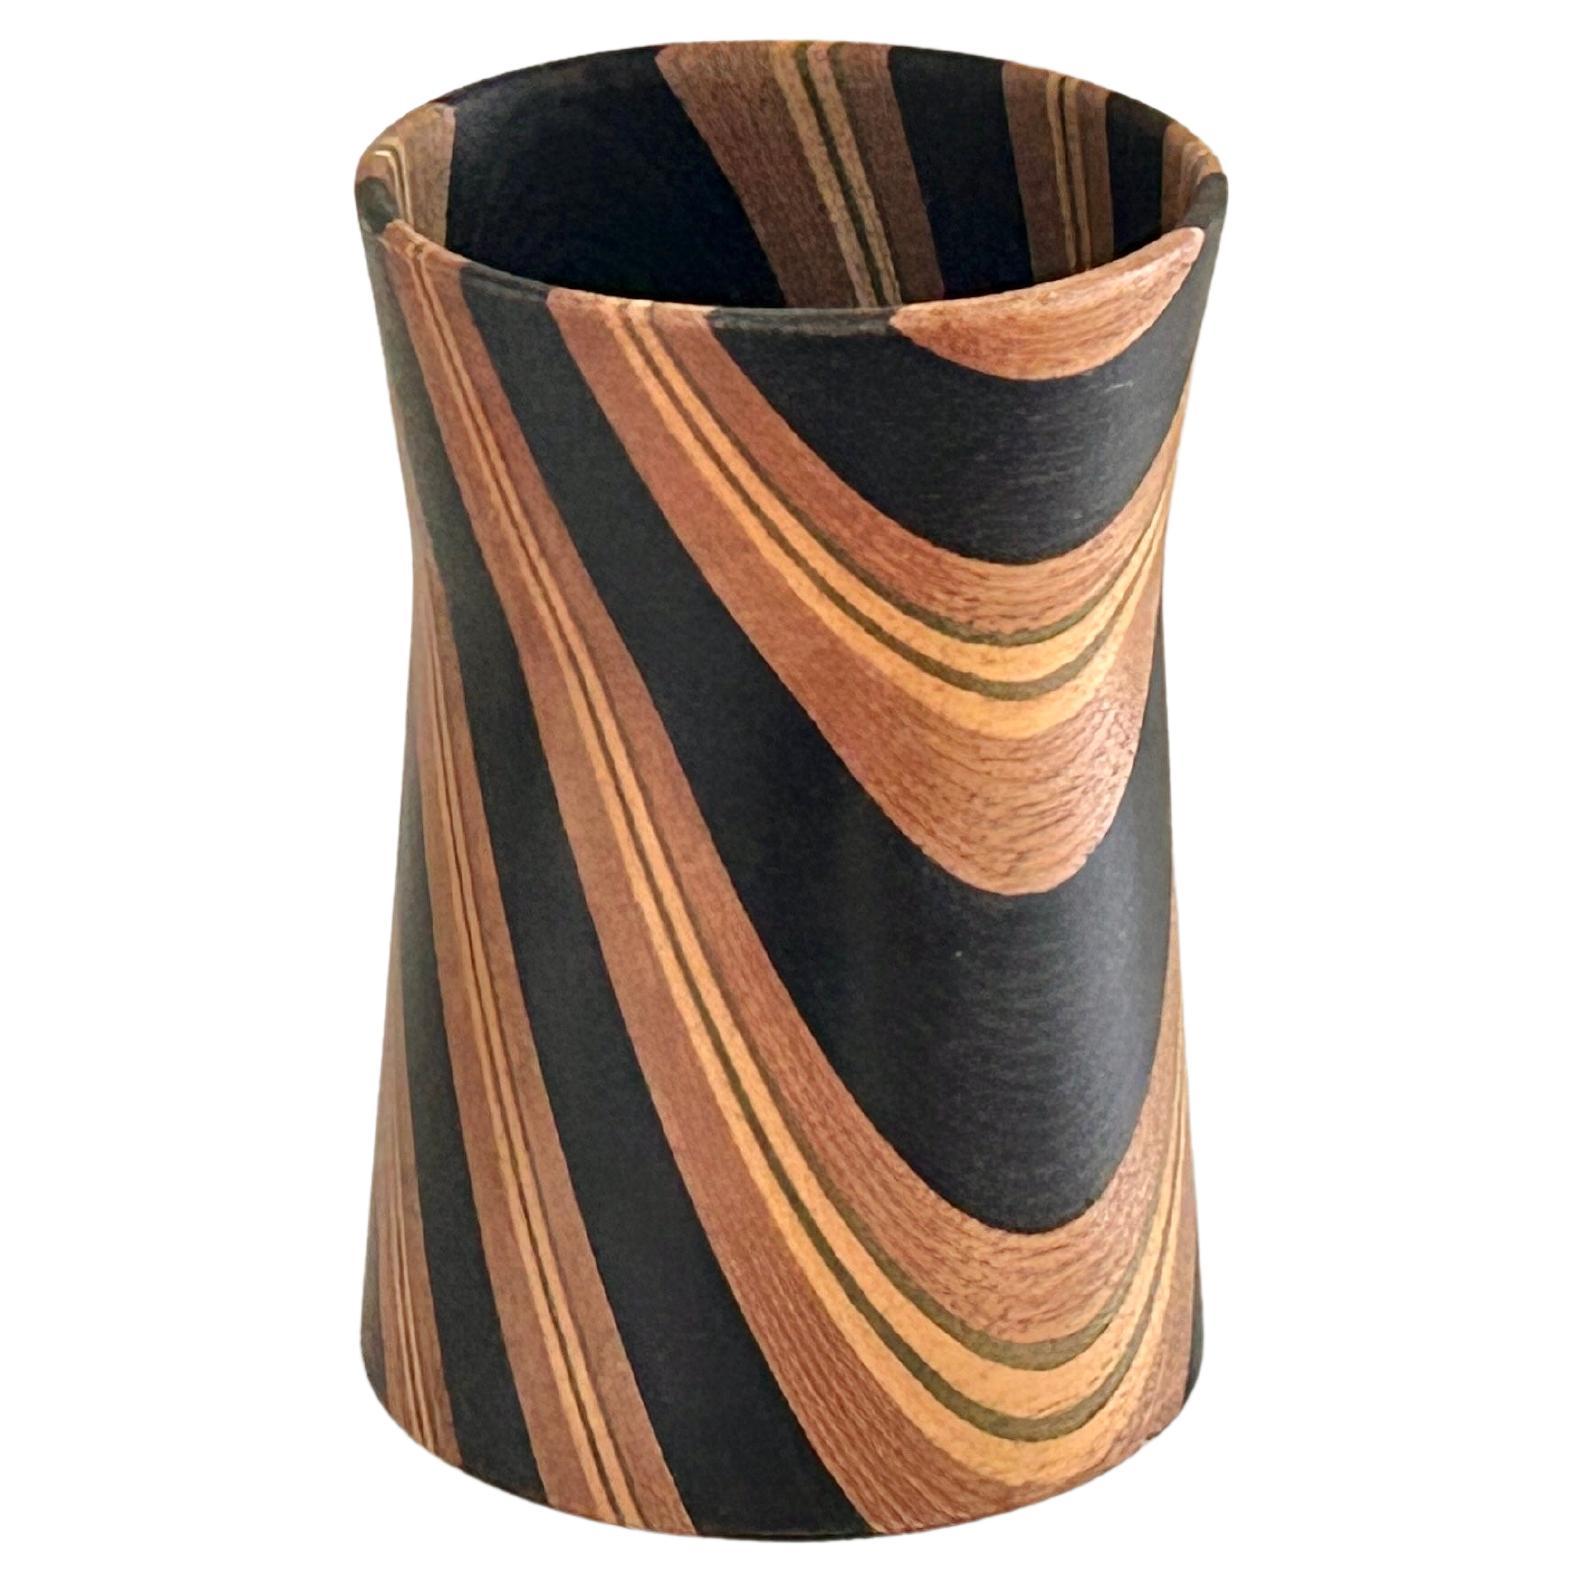 Colorwood vase designed by Angelo Mangiarotti for Alpimass 1980ies 